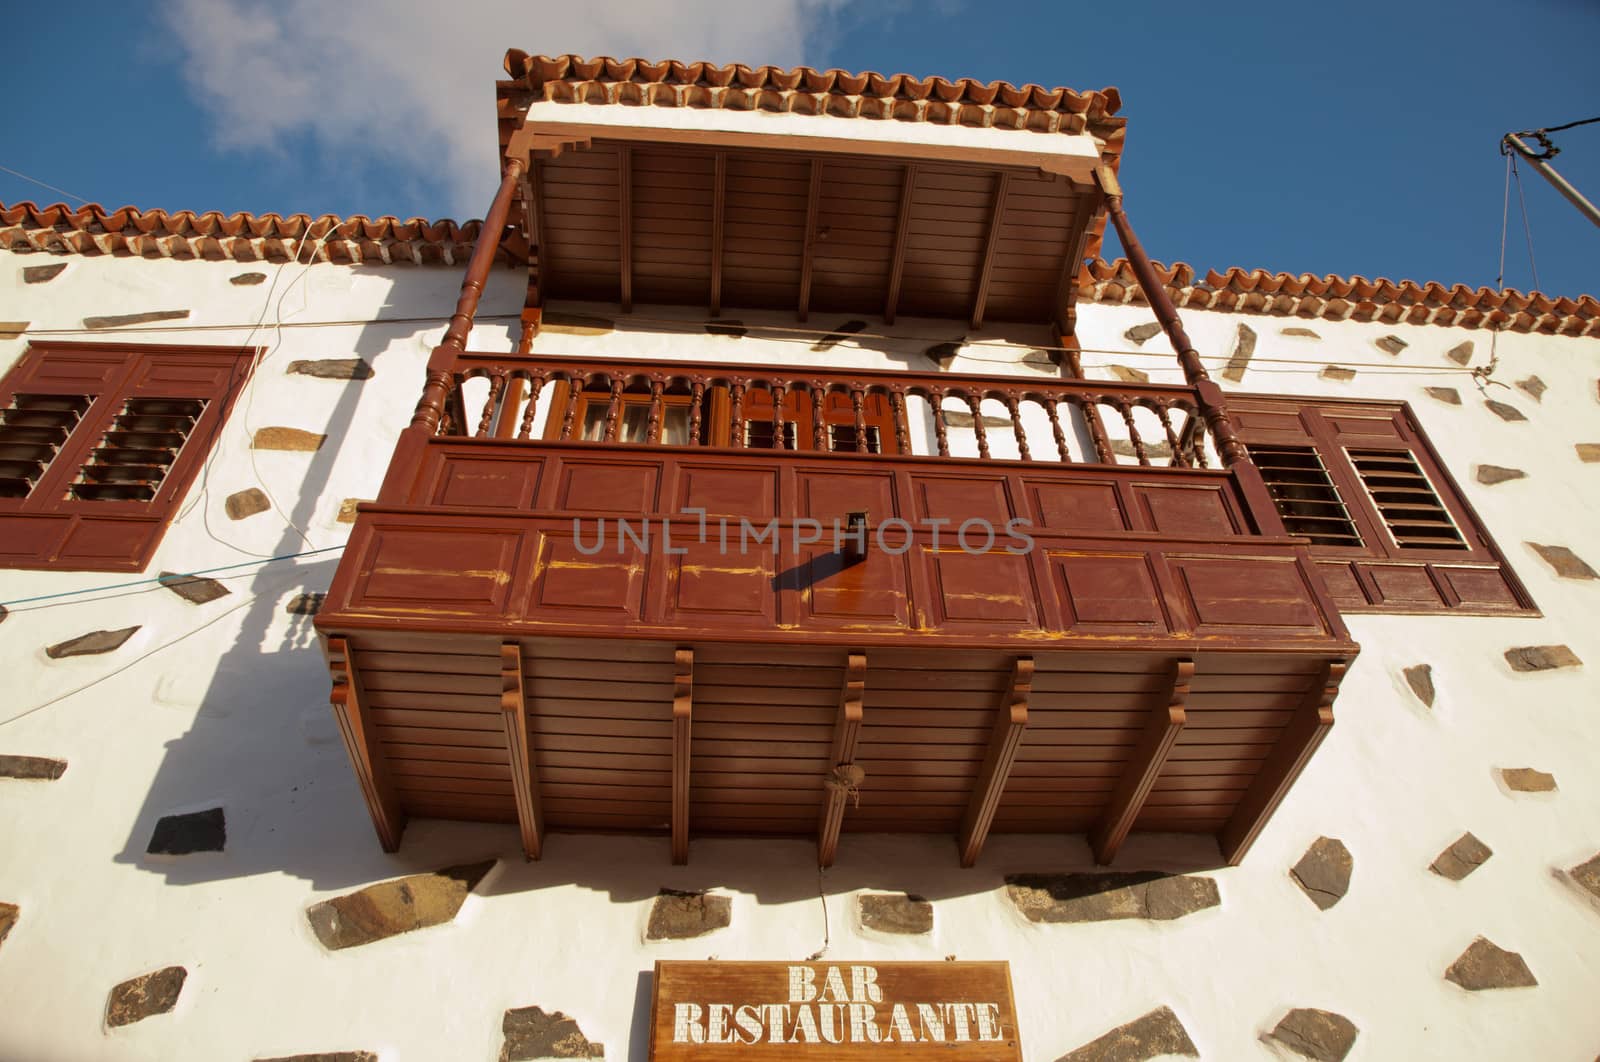 Local and traditional architecture in Tenerife island.